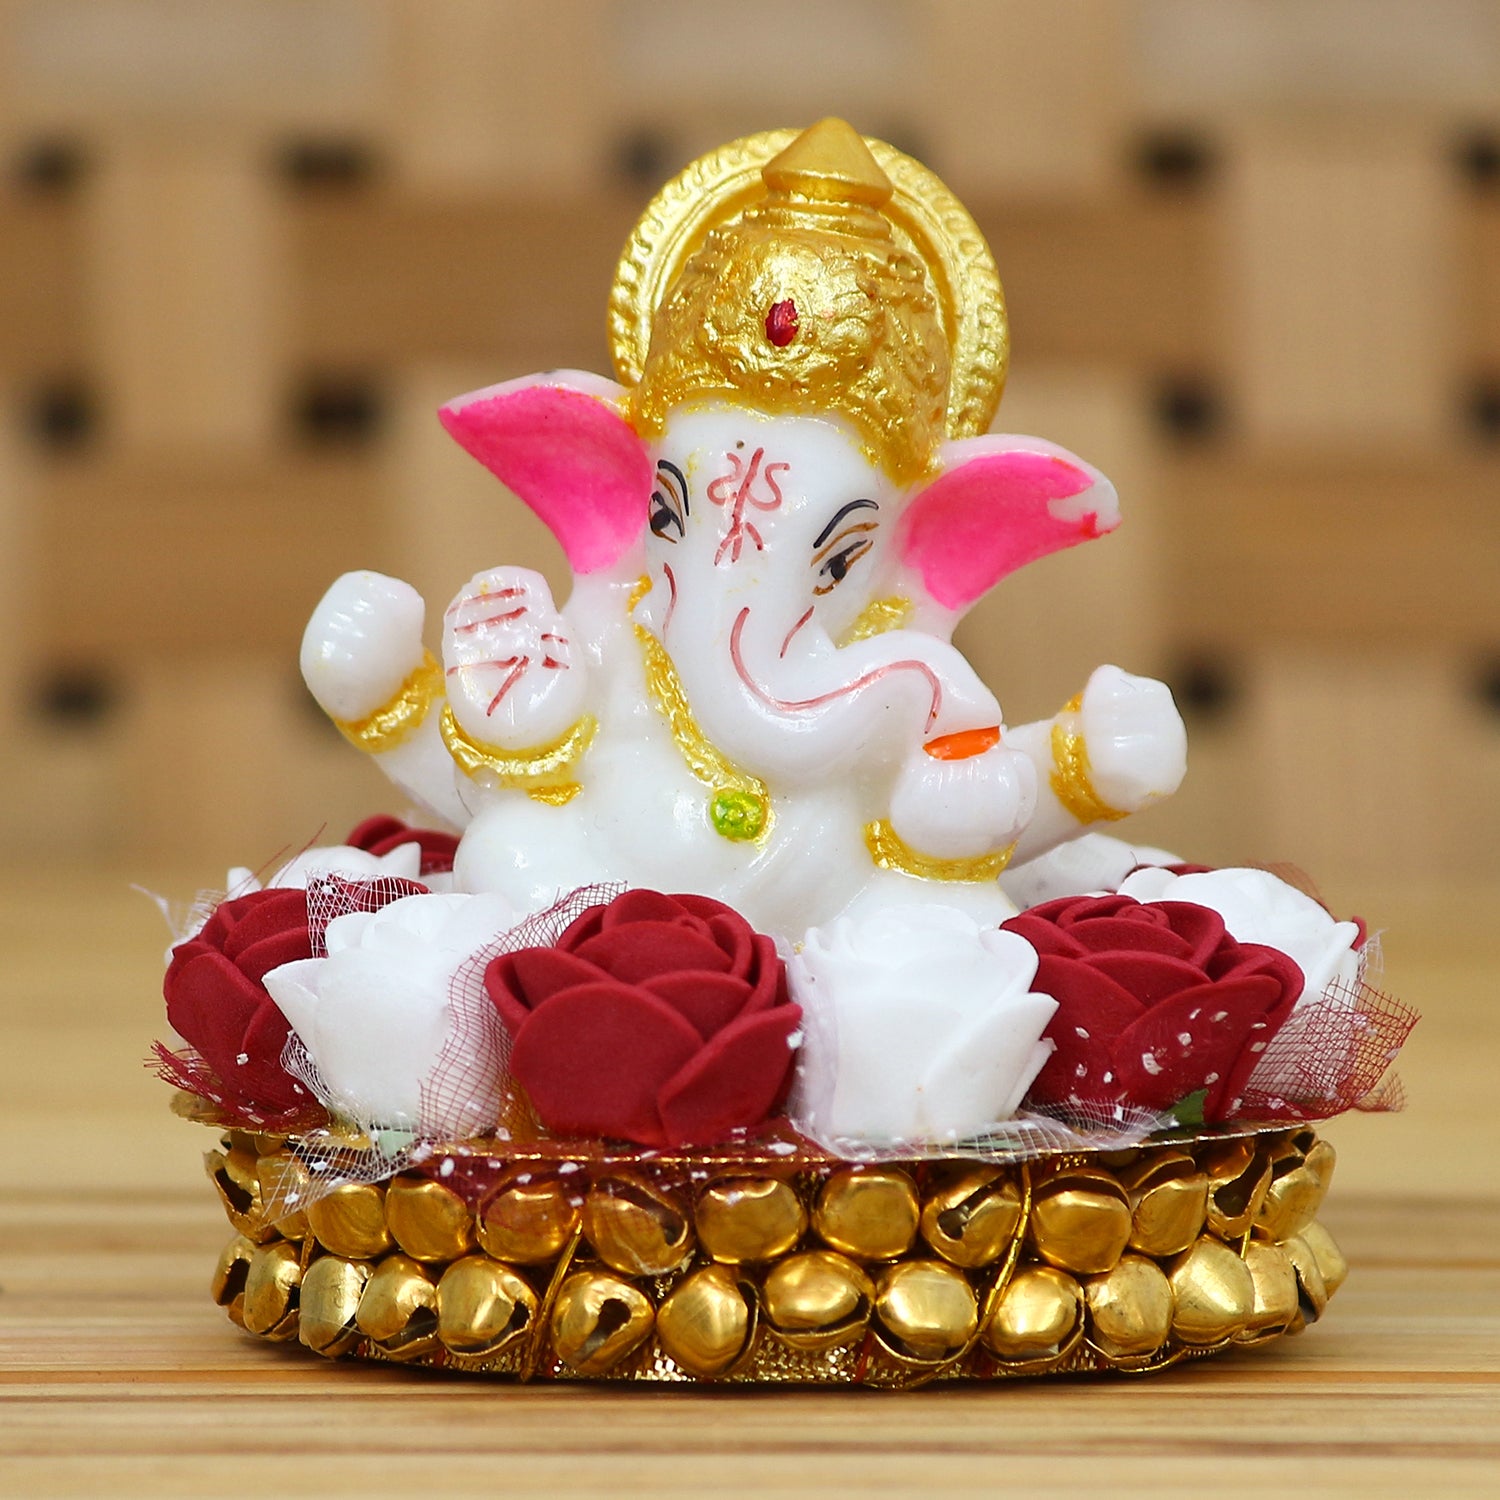 Golden and White Polyresin Lord Ganesha Idol on Decorative Handcrafted Plate with Red and White Flowers 1